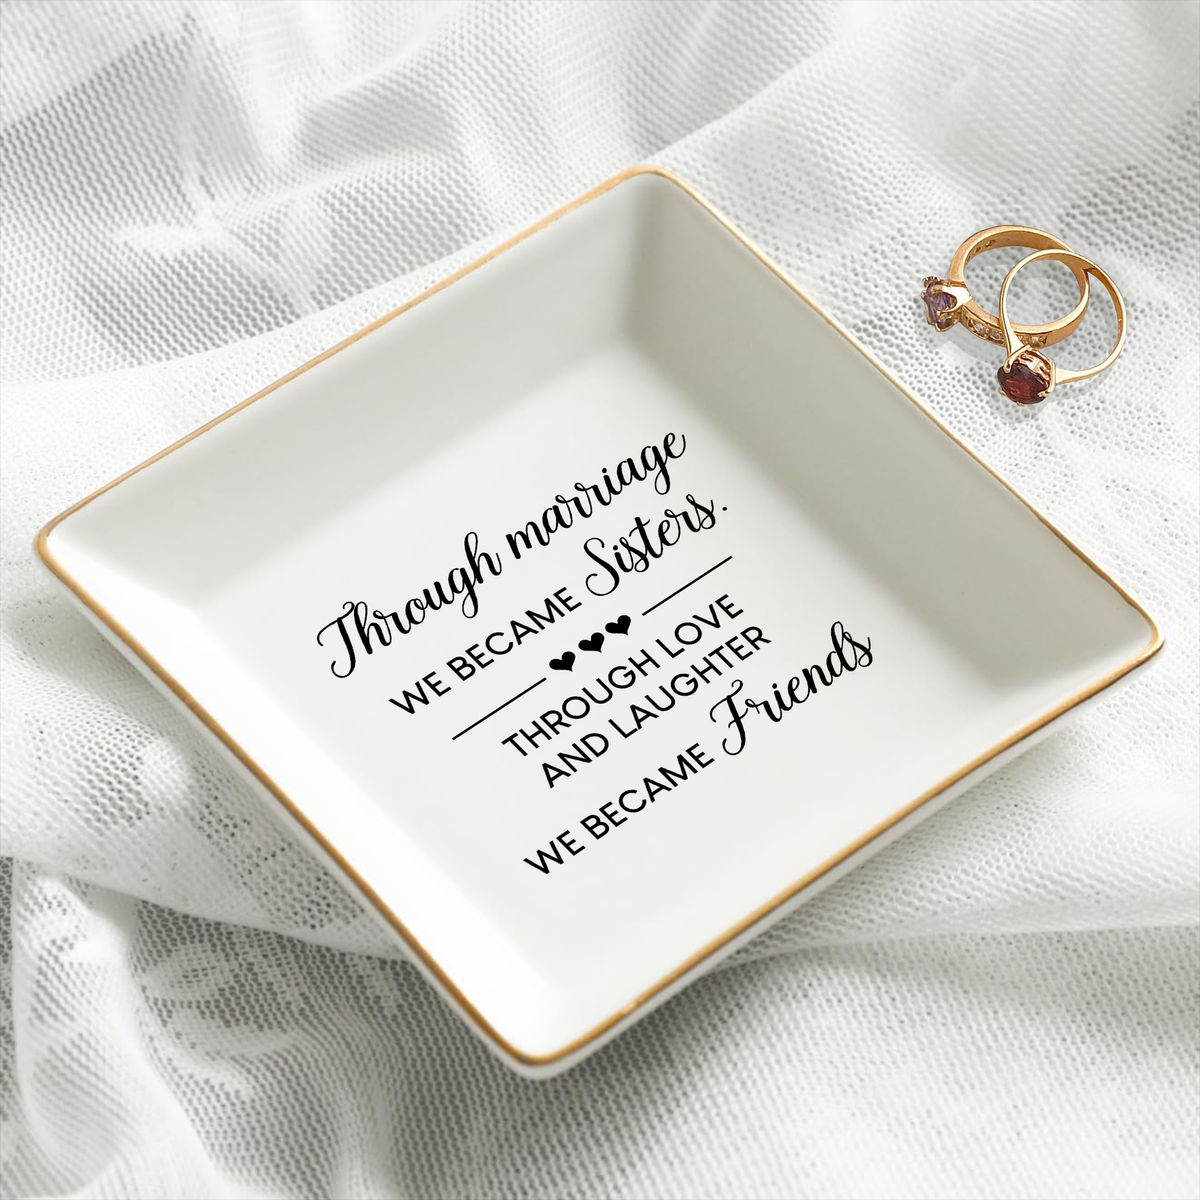 Personalized Jewelry Tray - Jewelry Tray - Birthday Gift for for Sister Friend Bestie, Wedding Gifts For Bride, Bridesmaid -  Through marriage we became Sisters._1